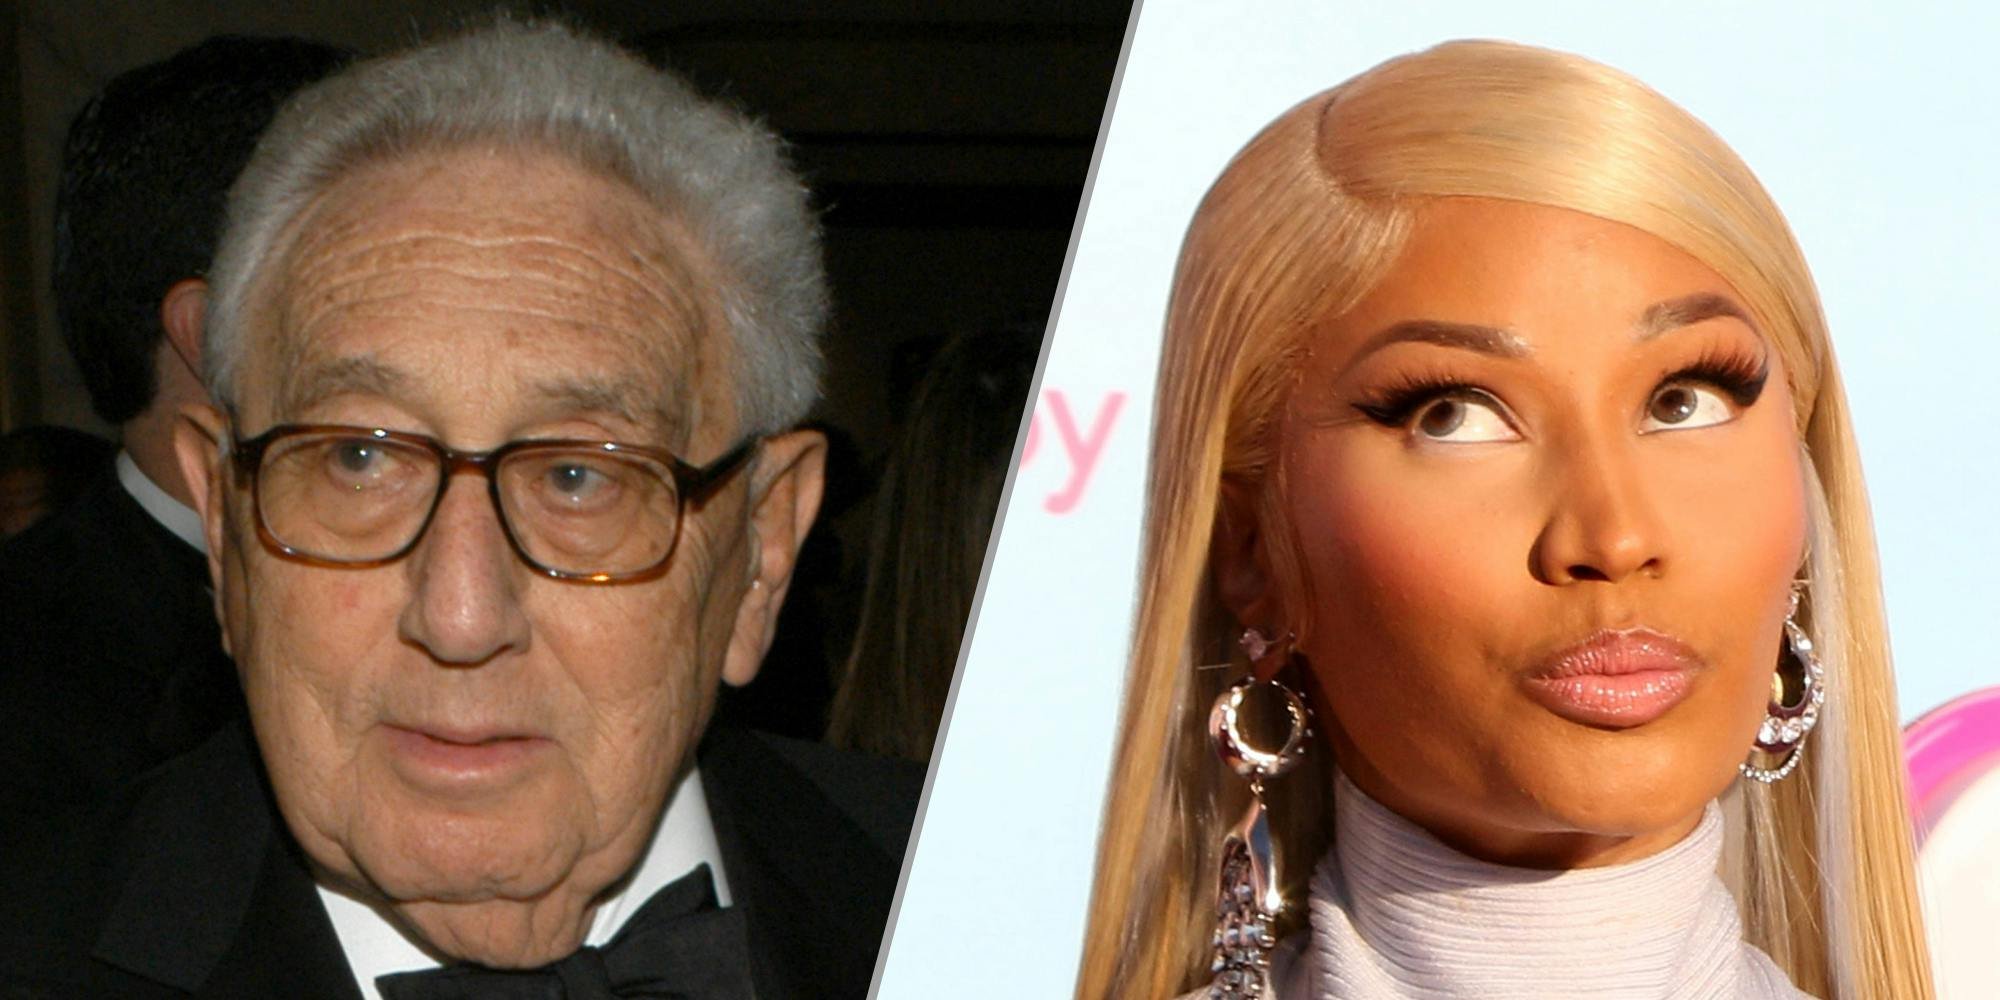 'Y’all have no idea what’s about to happen': Nicki Minaj's cryptic tweet has fans thinking she predicted Henry Kissinger's death